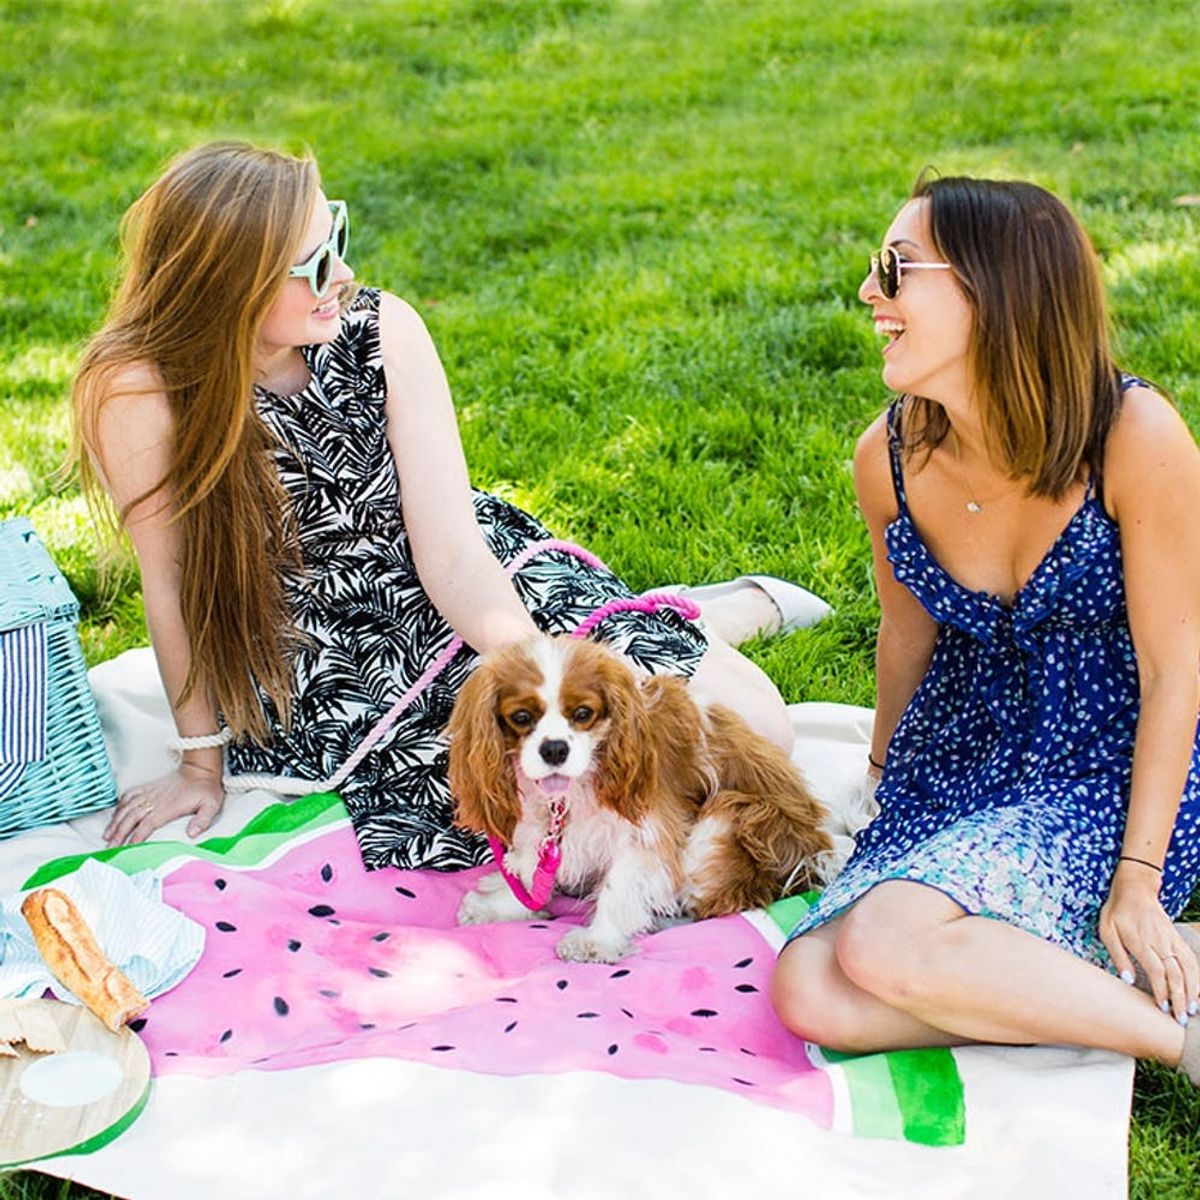 10 Yummy Food Swaps for an Ultra Healthy Picnic